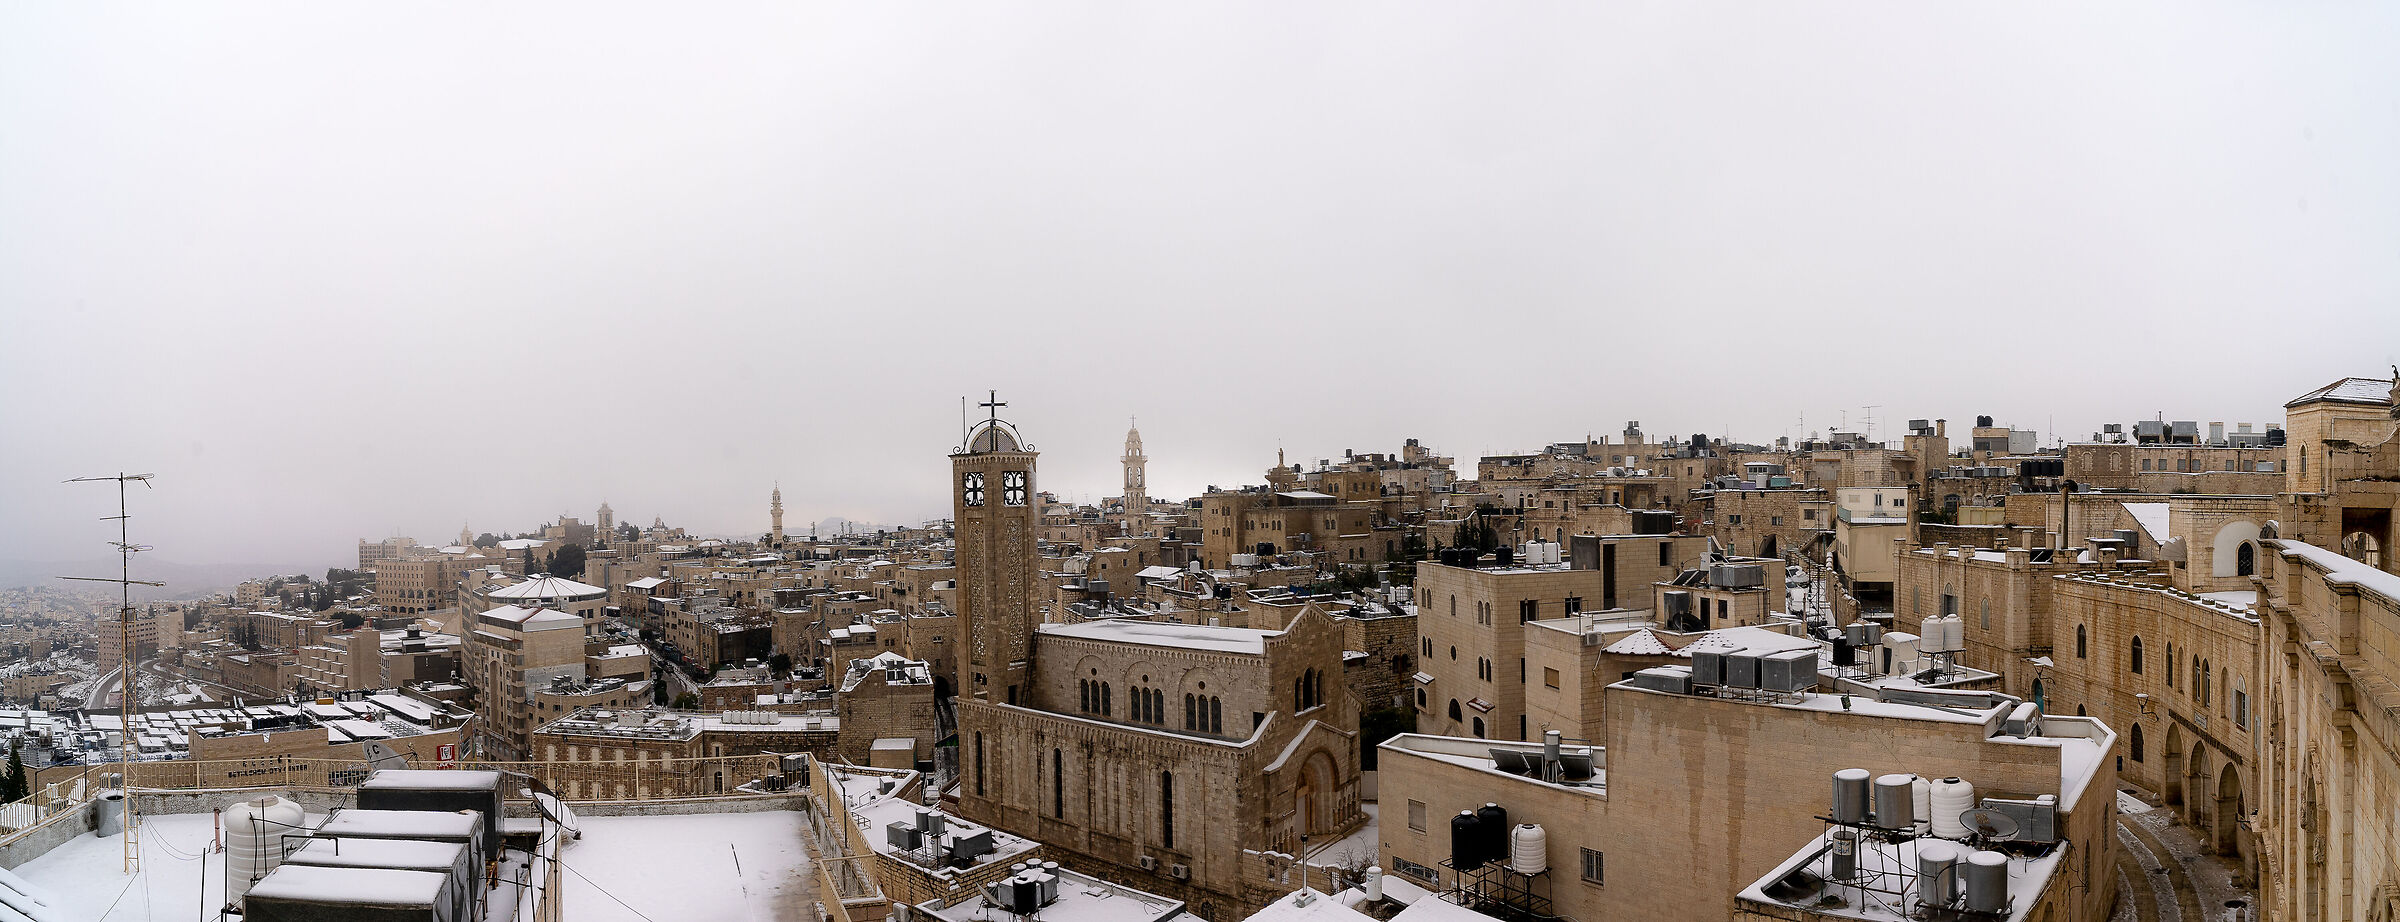 Bethlehem covered with snow...